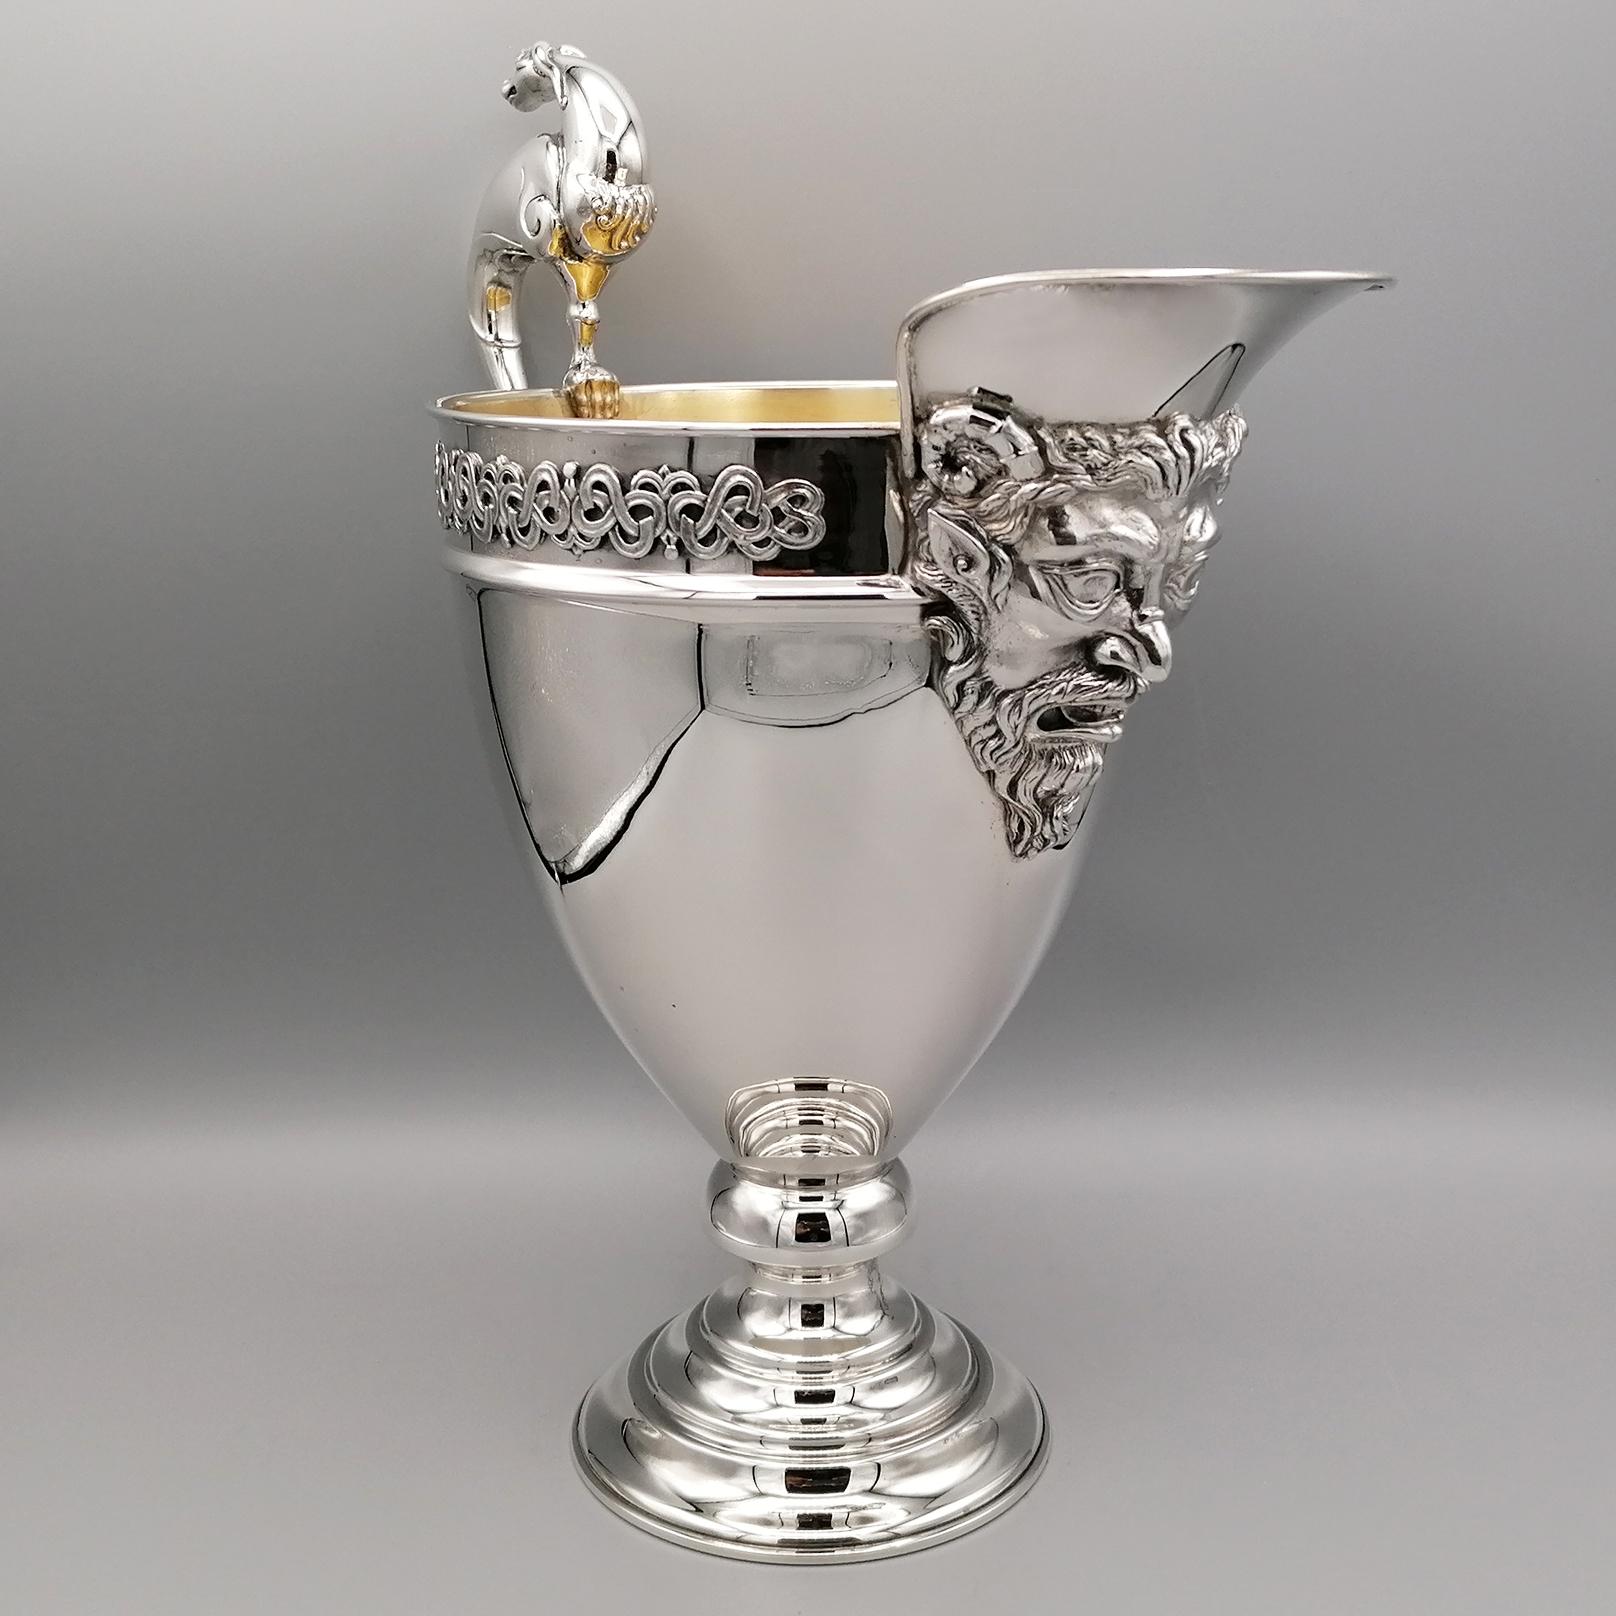 Renaissance-style solid silver jug, characterized by a central mask positioned under the spout and border with sixteenth-century motifs and handle with mythological animal.
Gold-plated interior.

Italian silverware, already with a centuries-old